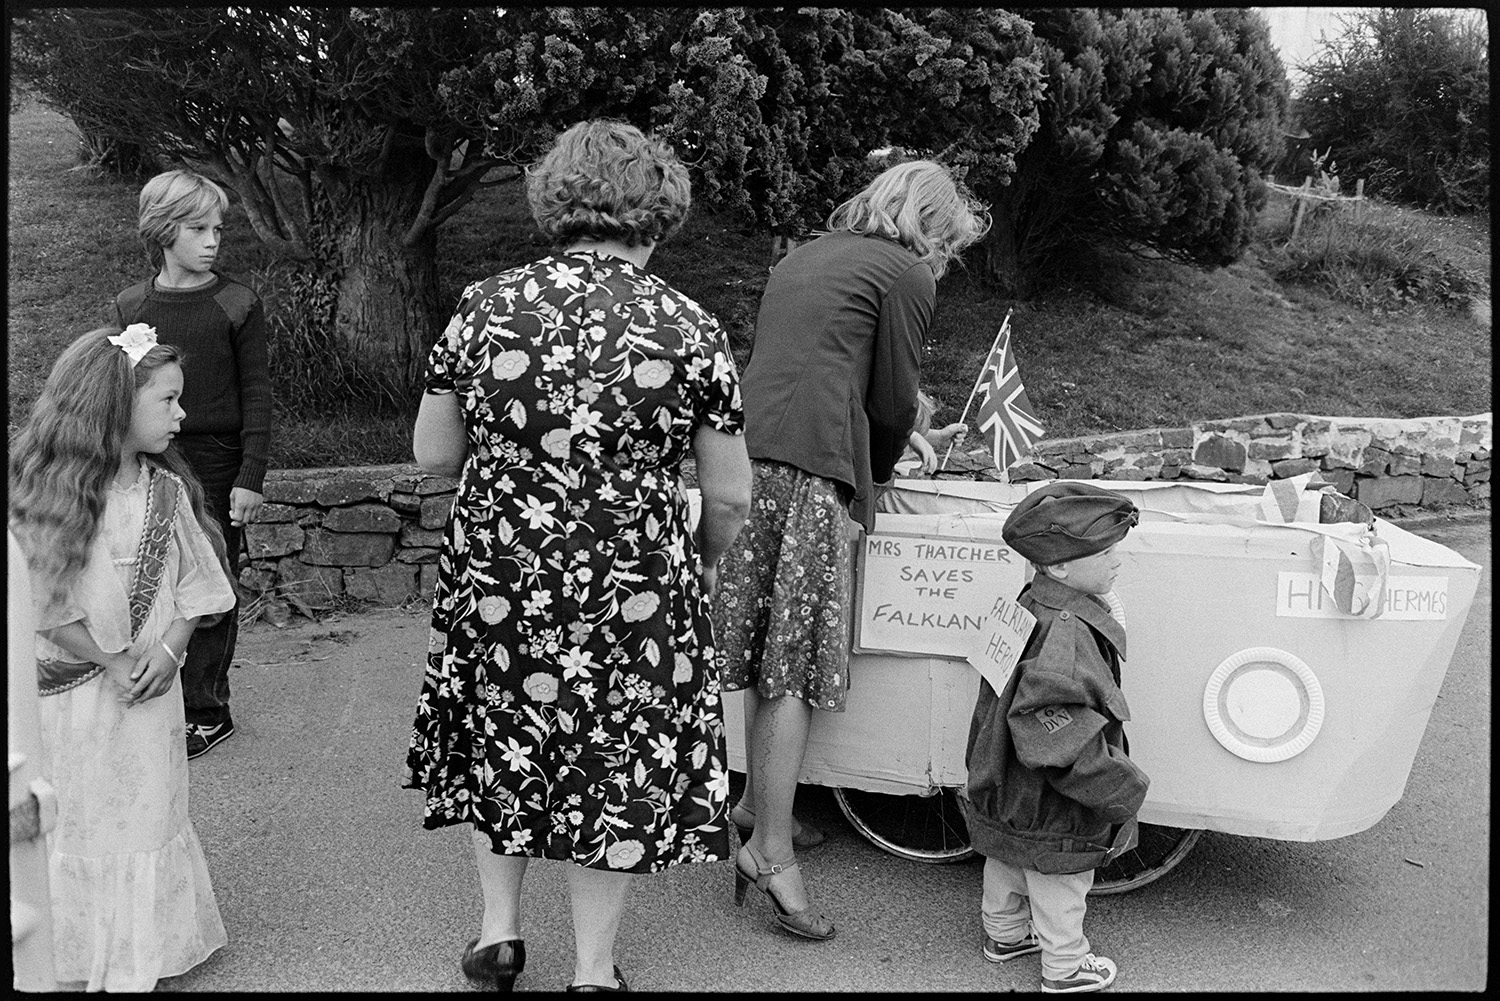 Fancy dress preparations, queen and attendants preparing for parade with brass band. 
[A woman placing a child into a fancy dress entry of a pram made into cardboard boat of HMS Hermes, at Chulmleigh Fair. A sign on the side reads 'Mrs Thatched Saves the Falklands!' and a child is stood next to her with another sign reading 'Falklands Hero!'. The Fair Princess is watching on.]